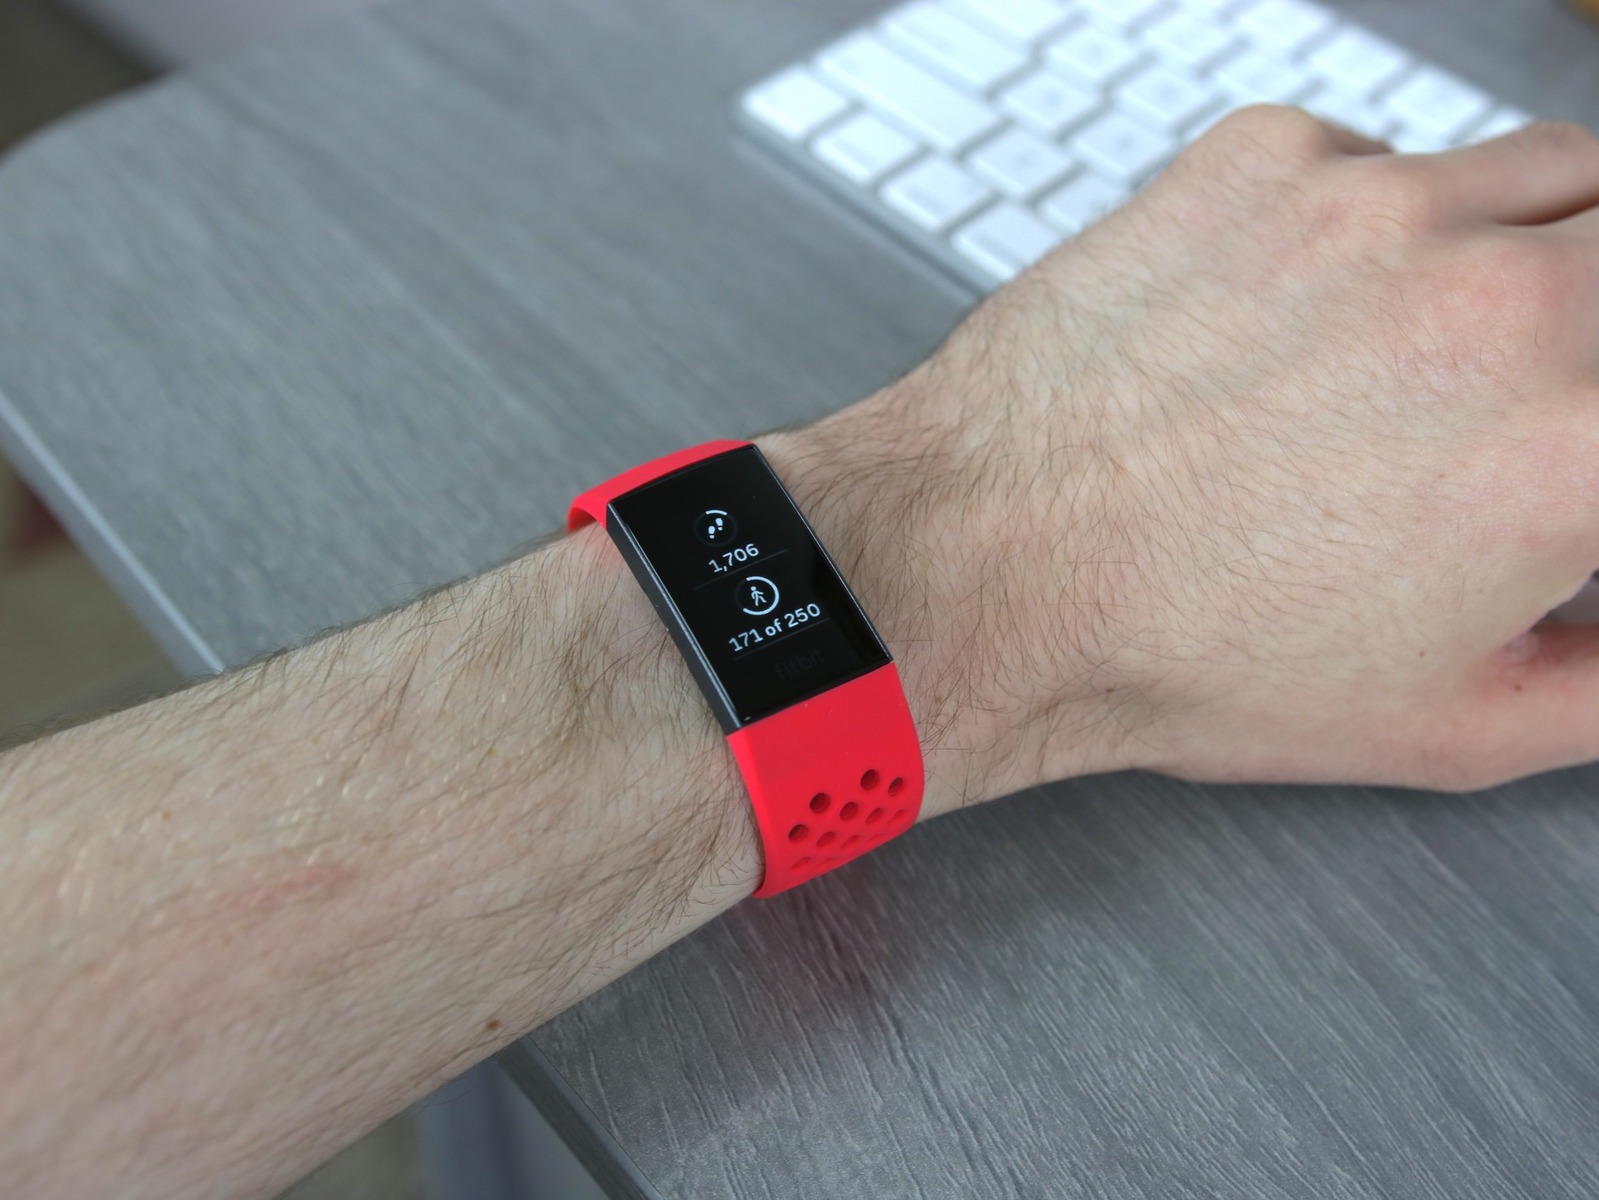 band-replacement-swapping-the-band-on-fitbit-charge